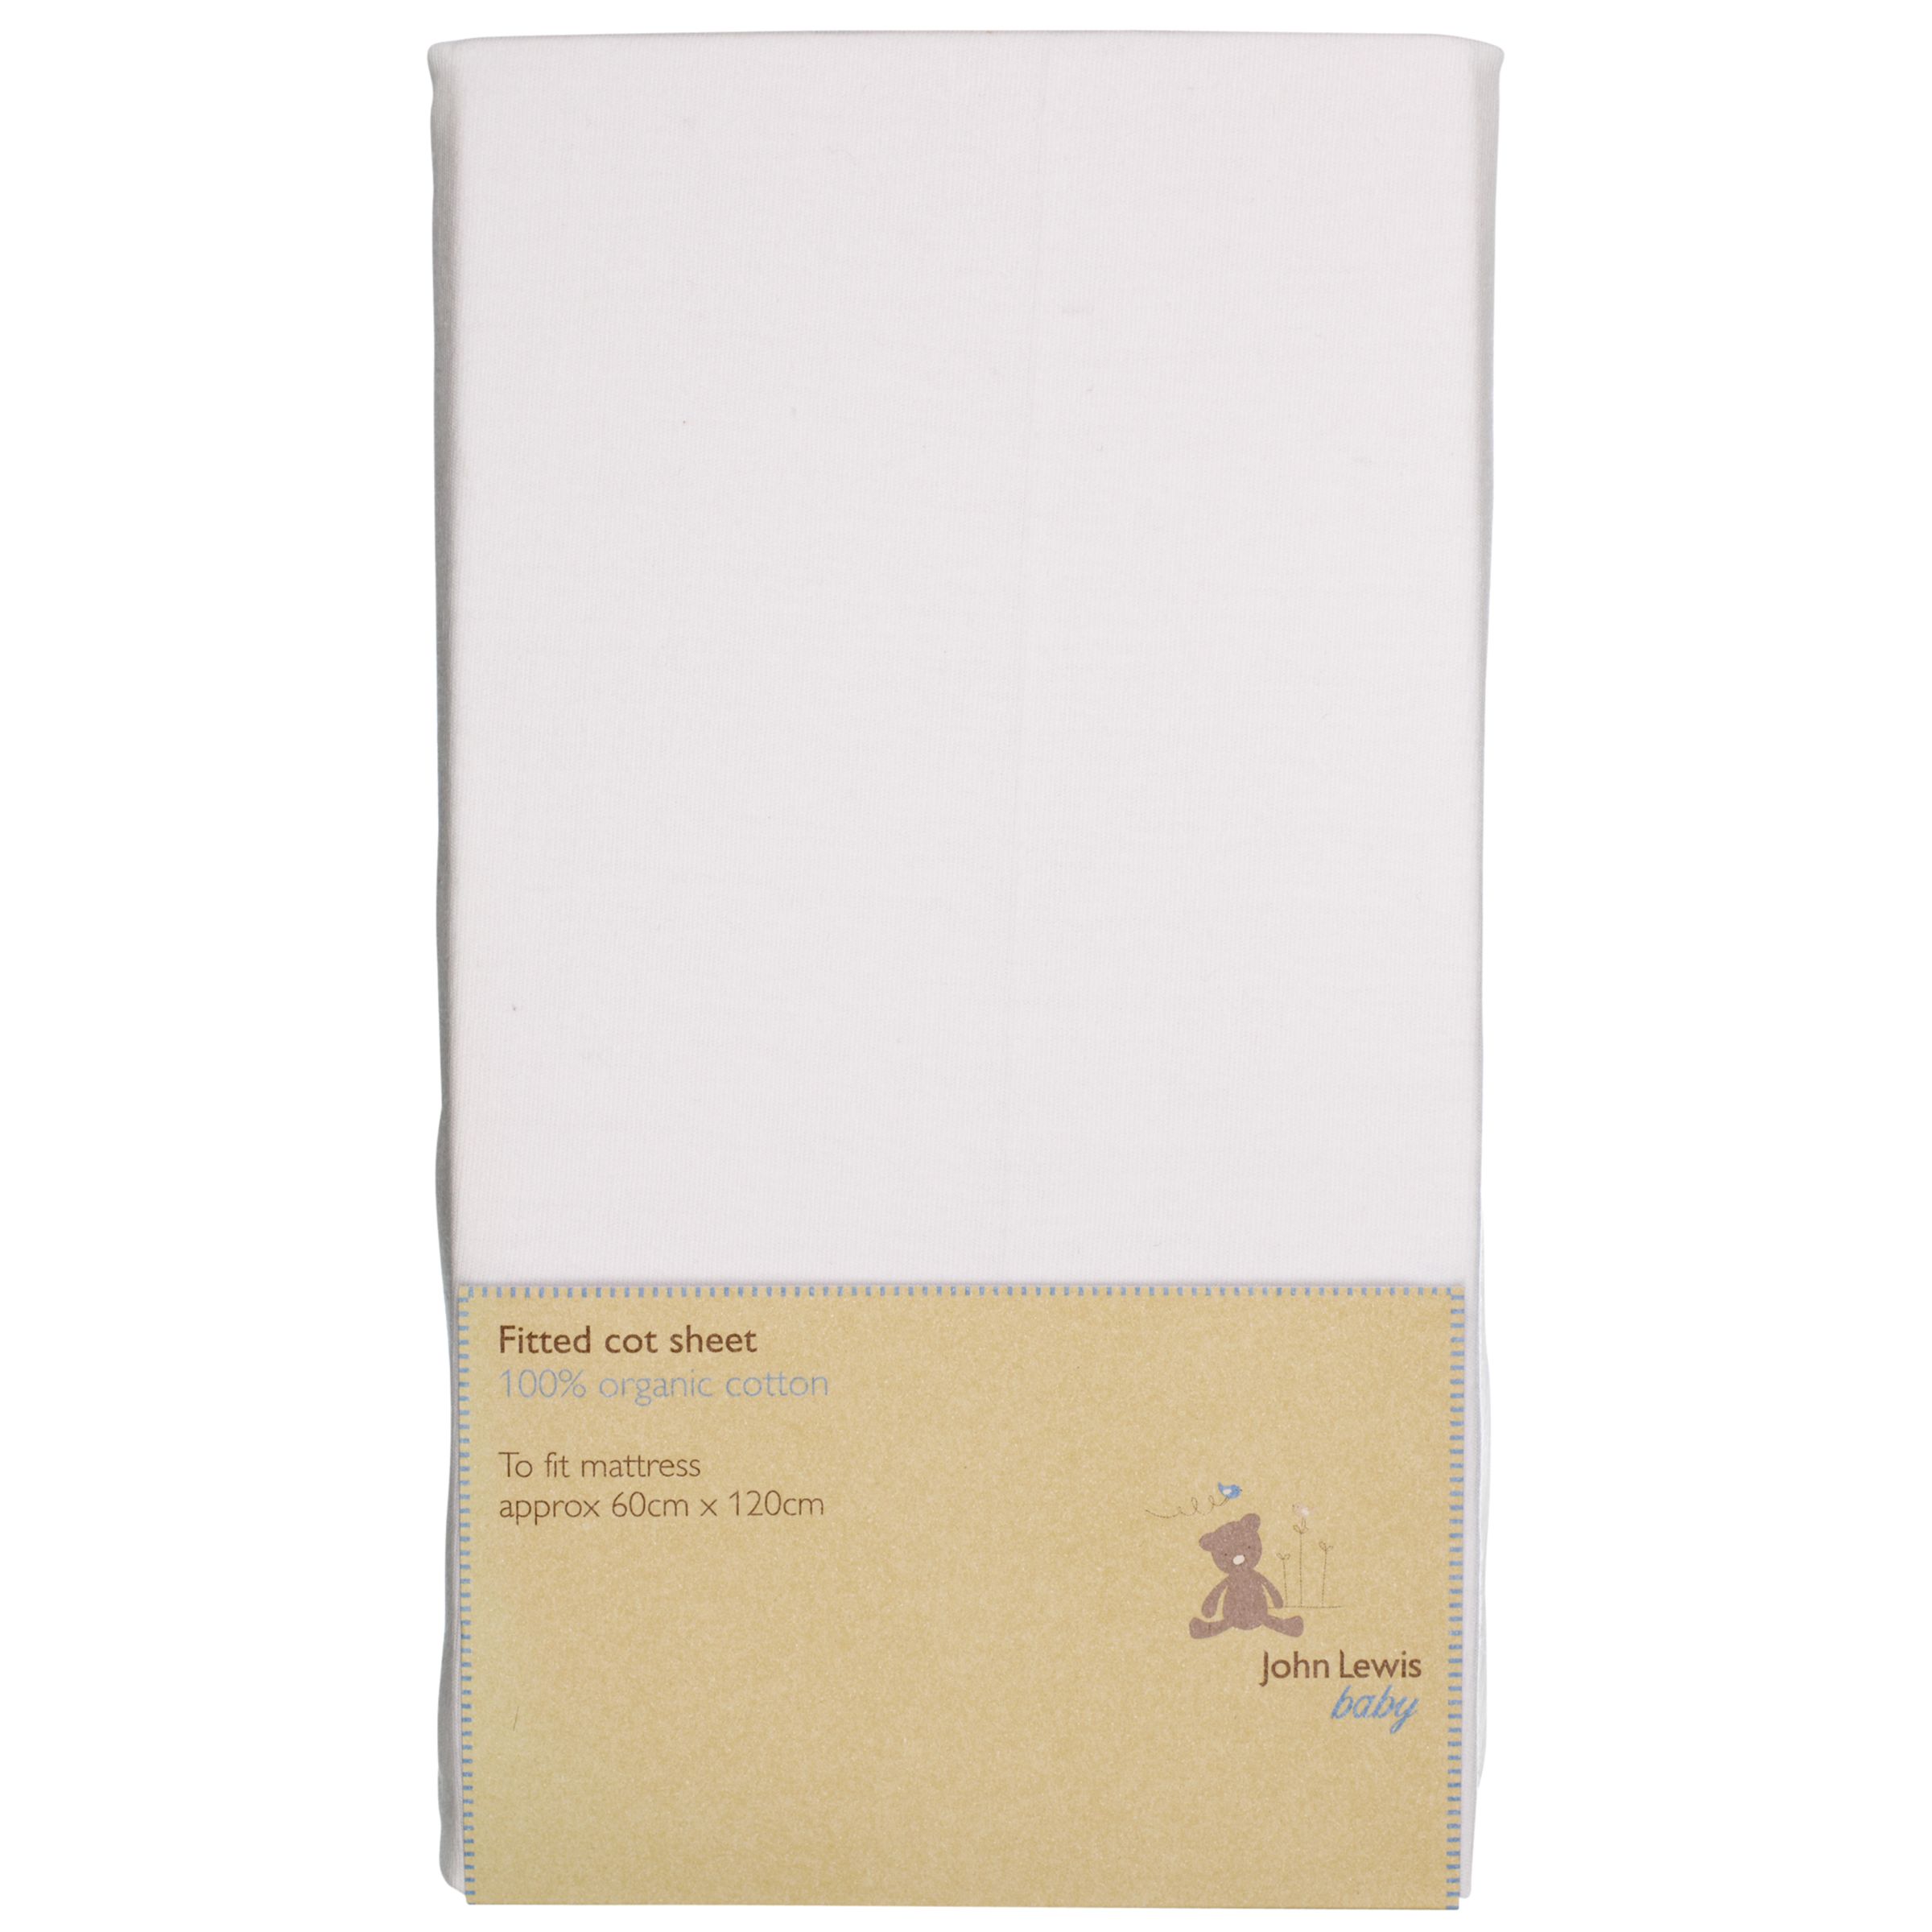 John Lewis Baby Fitted Organic Cotton Cot Sheet,